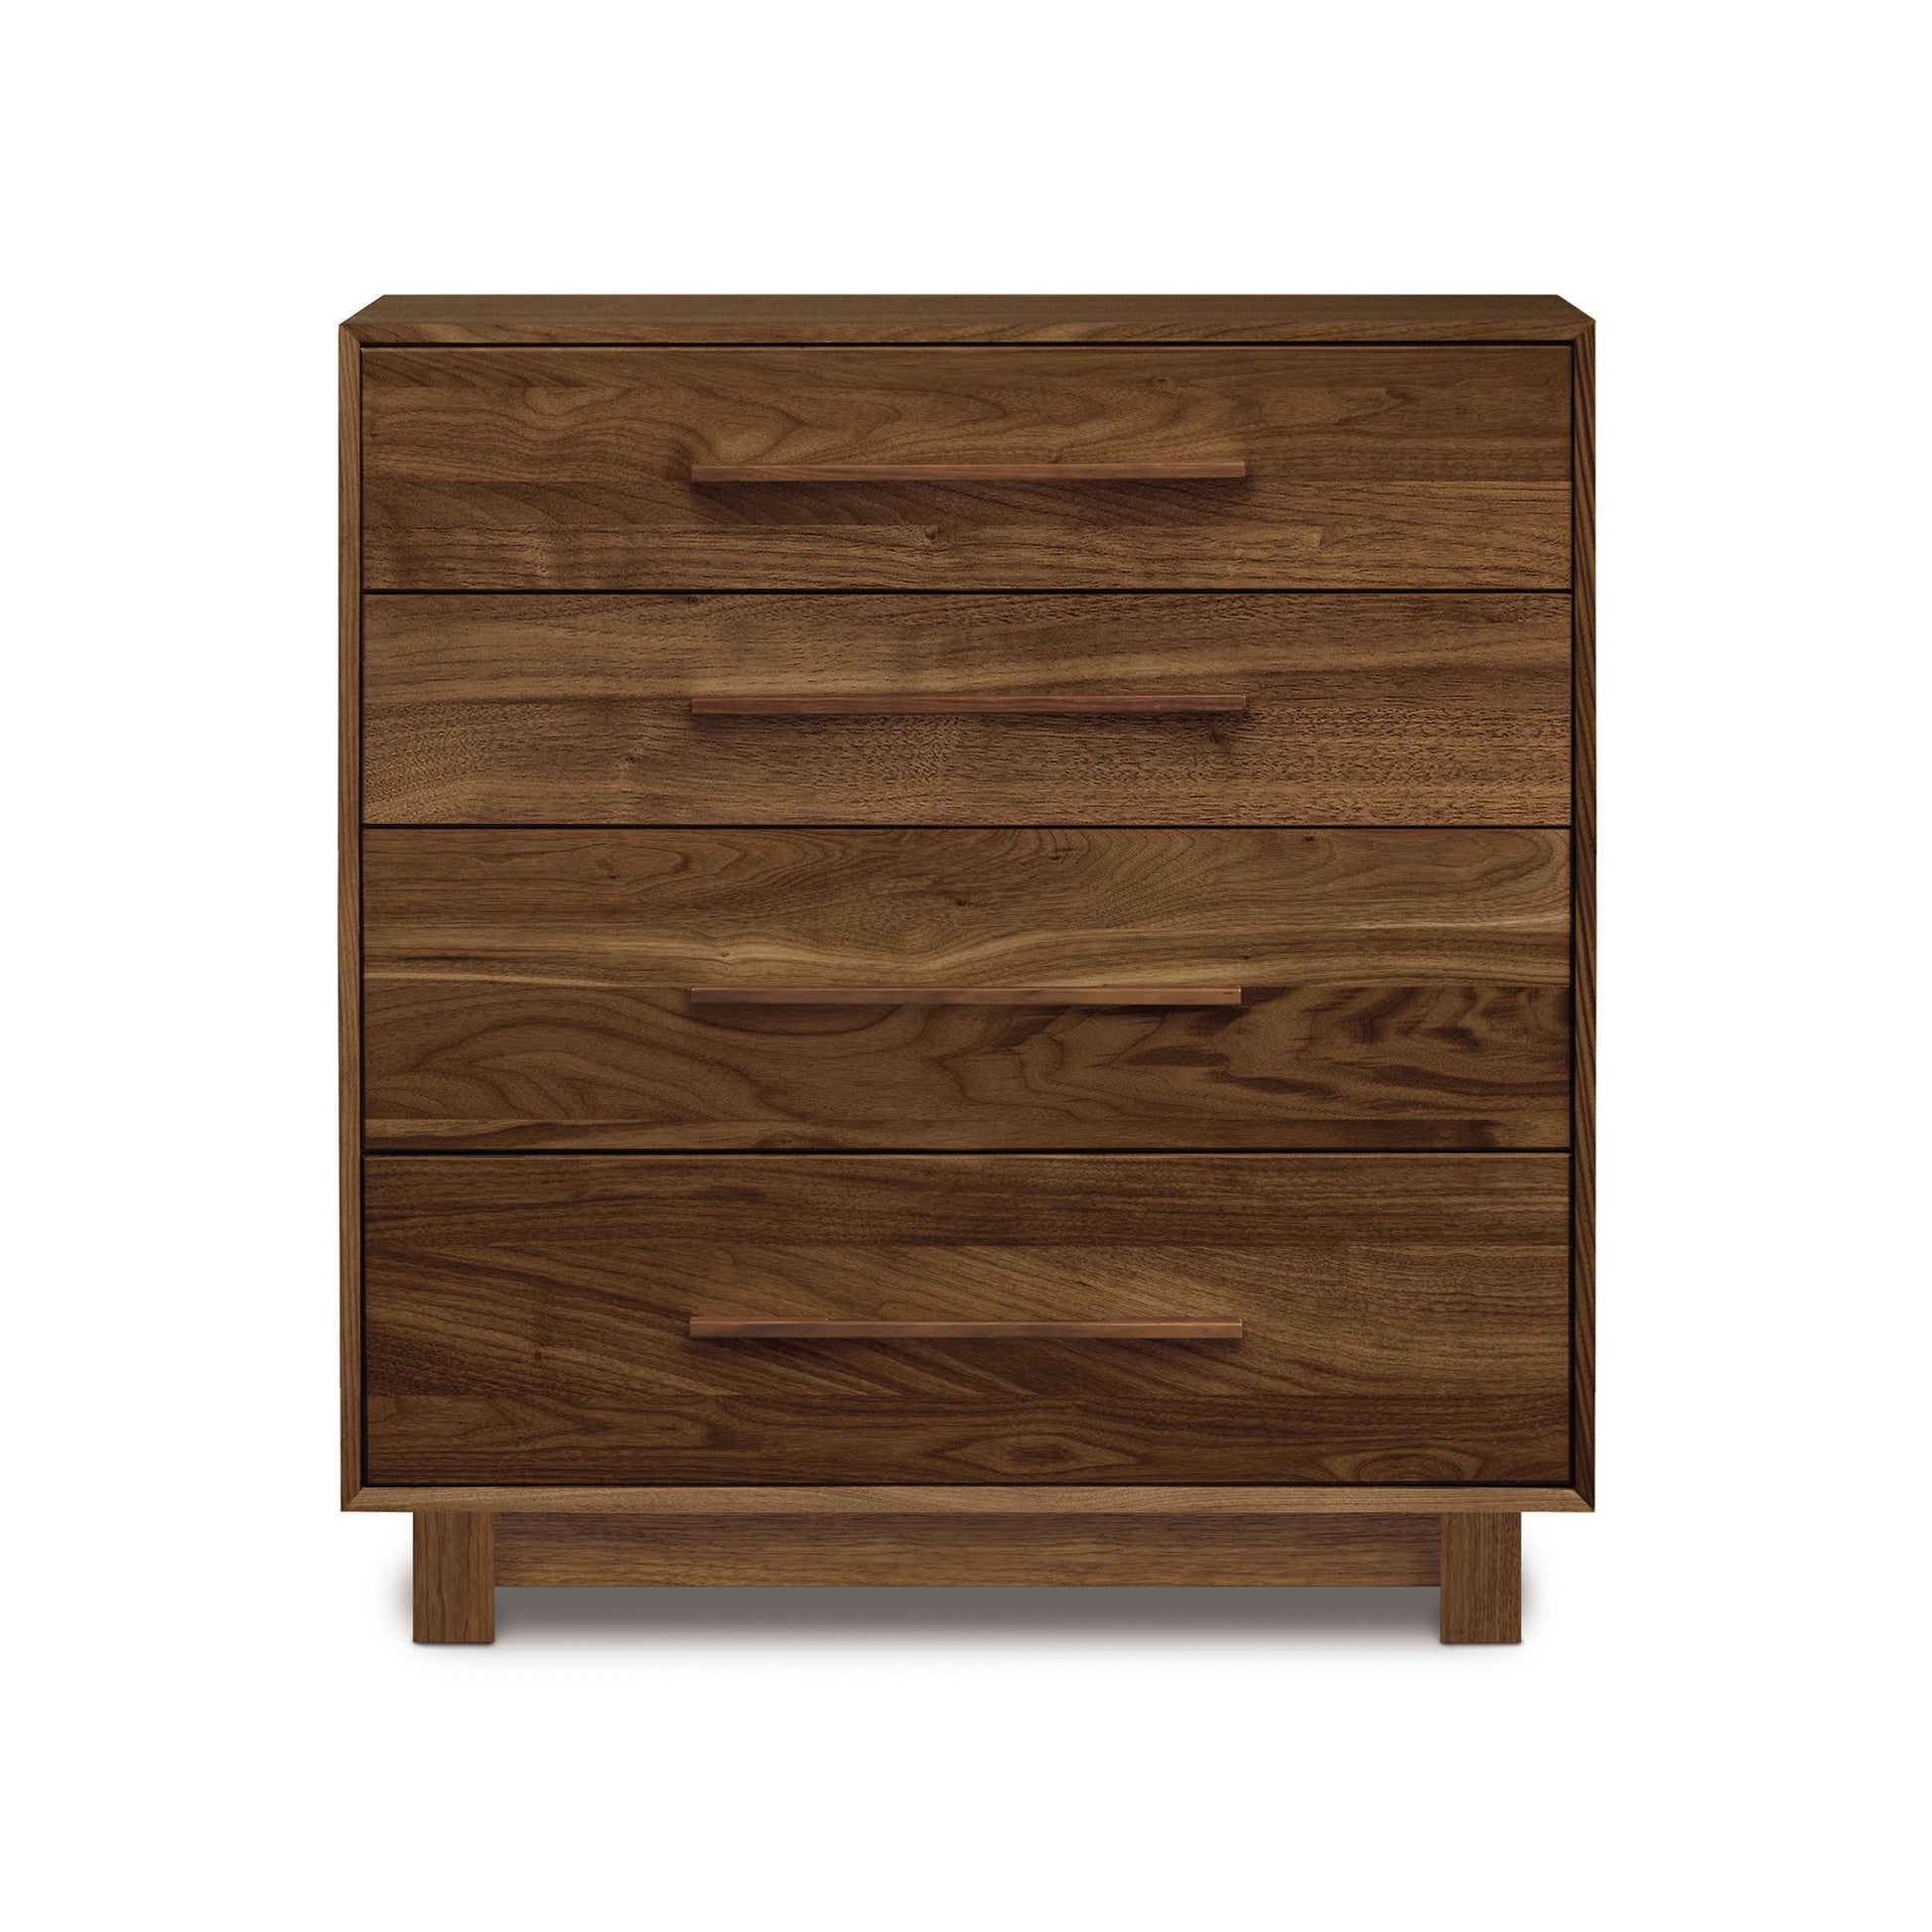 The Copeland Furniture Sloane 4-Drawer Chest is a modern and contemporary bedroom essential featuring wooden drawers.